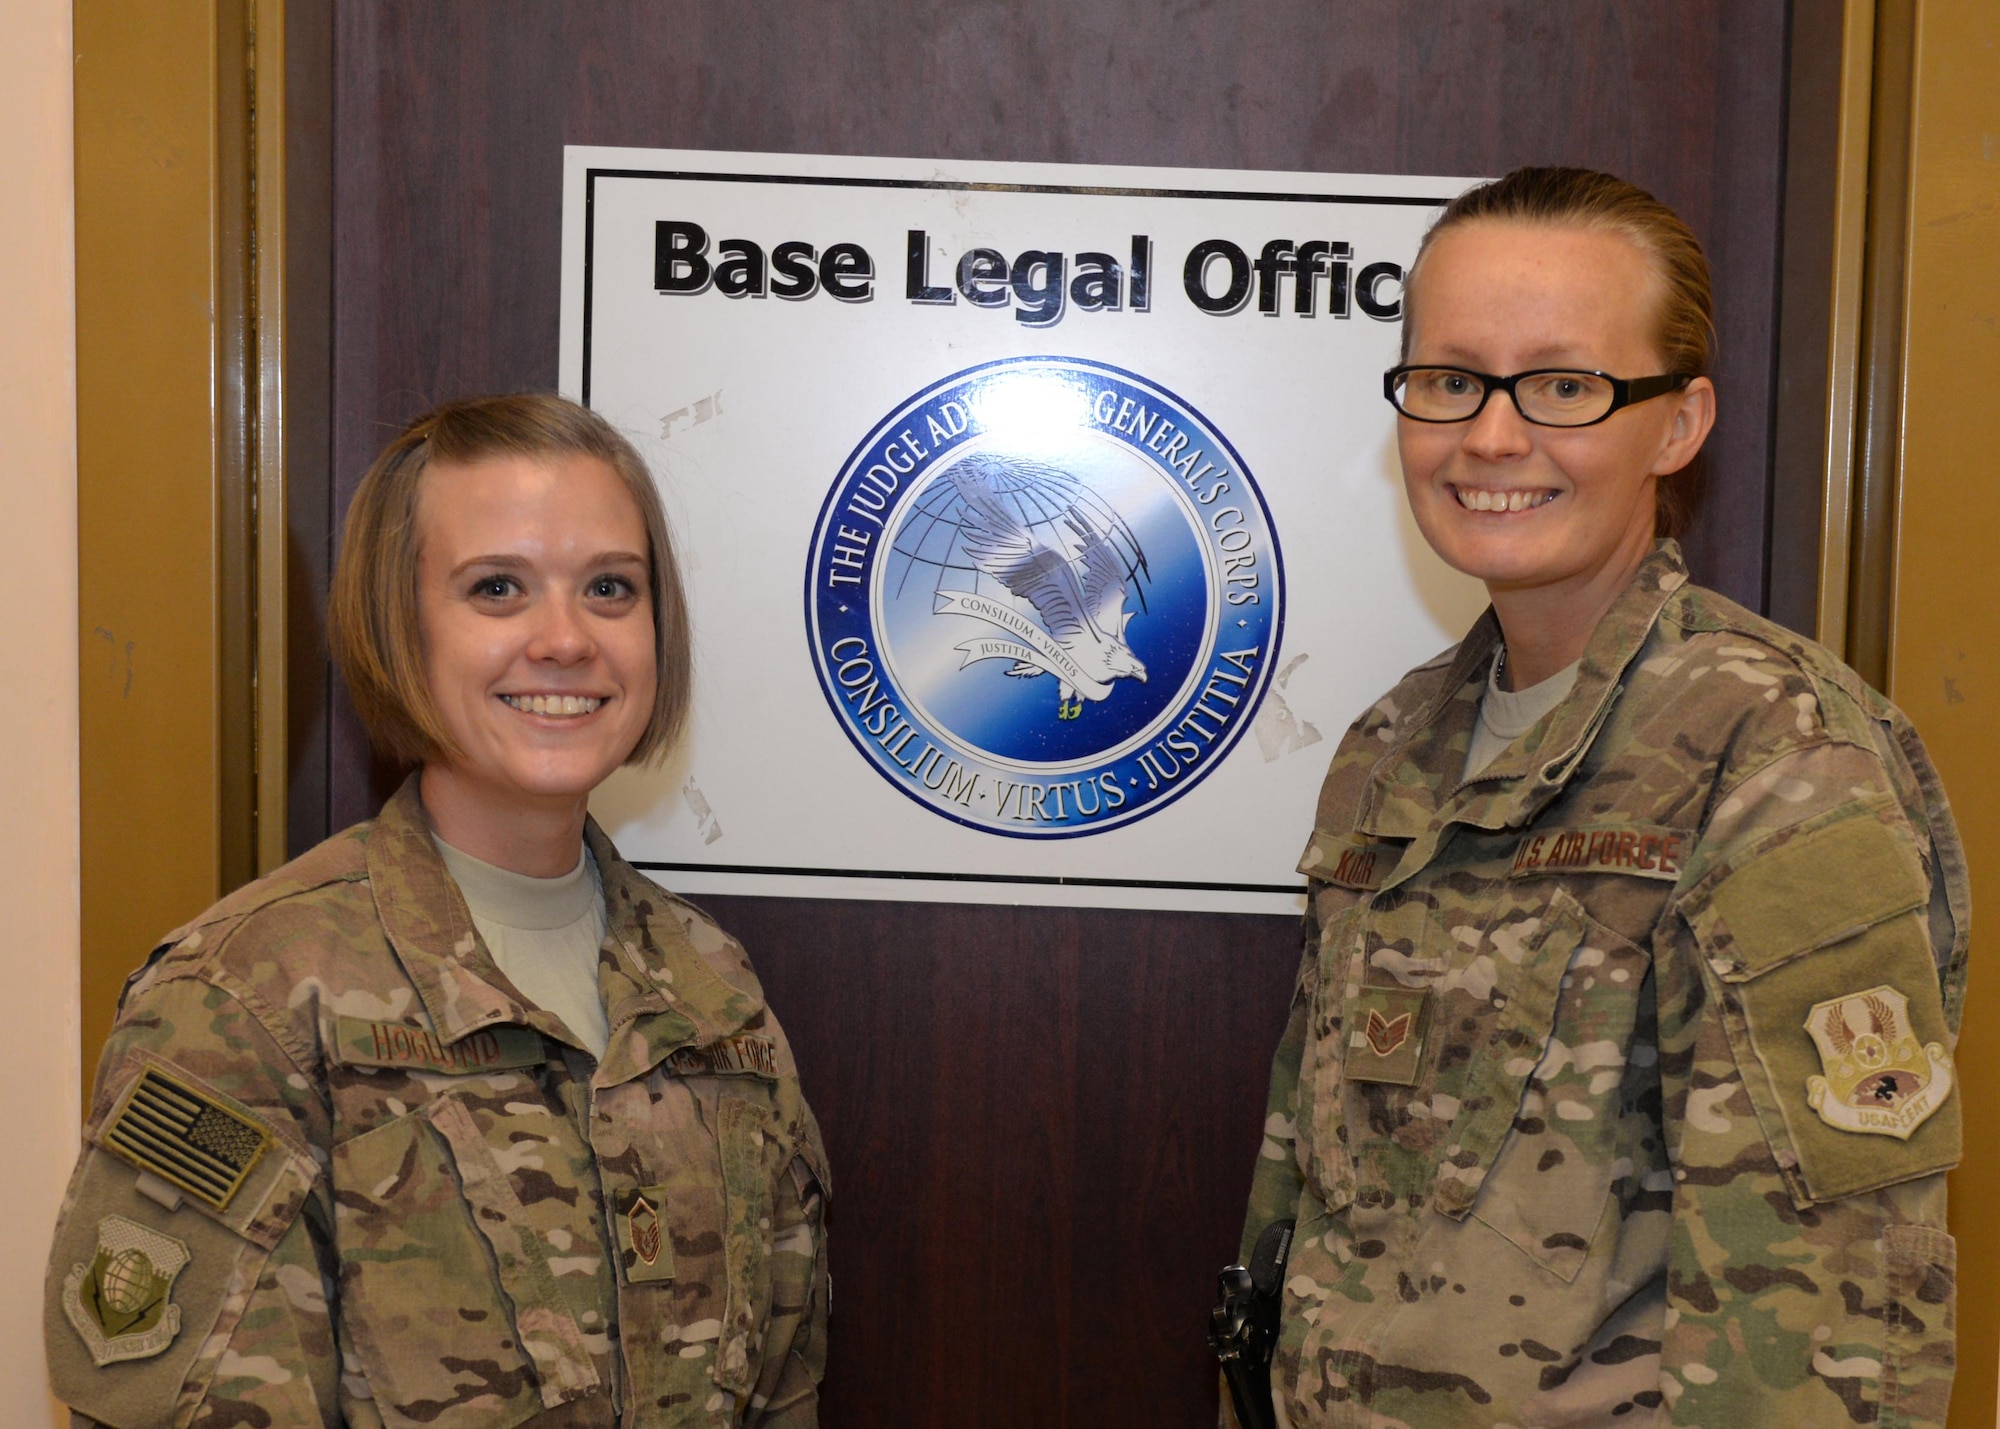 U.S. Air Force Mater Sgt. Natasha Hoglund, left, and Staff Sgt. Angel Kozar, both assigned to the 455th Air Expeditionary Wing Legal Office, pose for a photo July 18, 2015, at Bagram Airfield, Afghanistan. The legal team is here to help military members with legal issues they may be dealing with at home and here in the AOR. (U.S. Air Force photo by Senior Airman Cierra Presentado/Released)